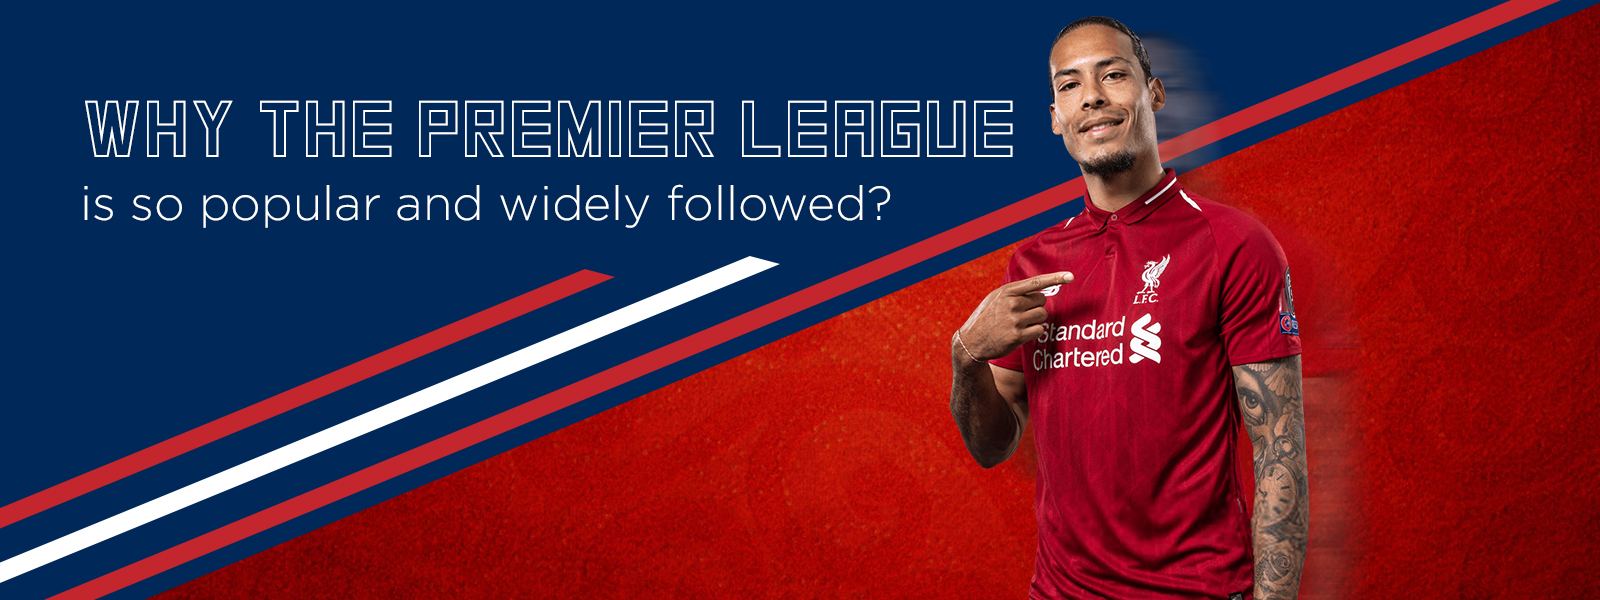 Why The Premier League Is So Popular And Widely Followed?